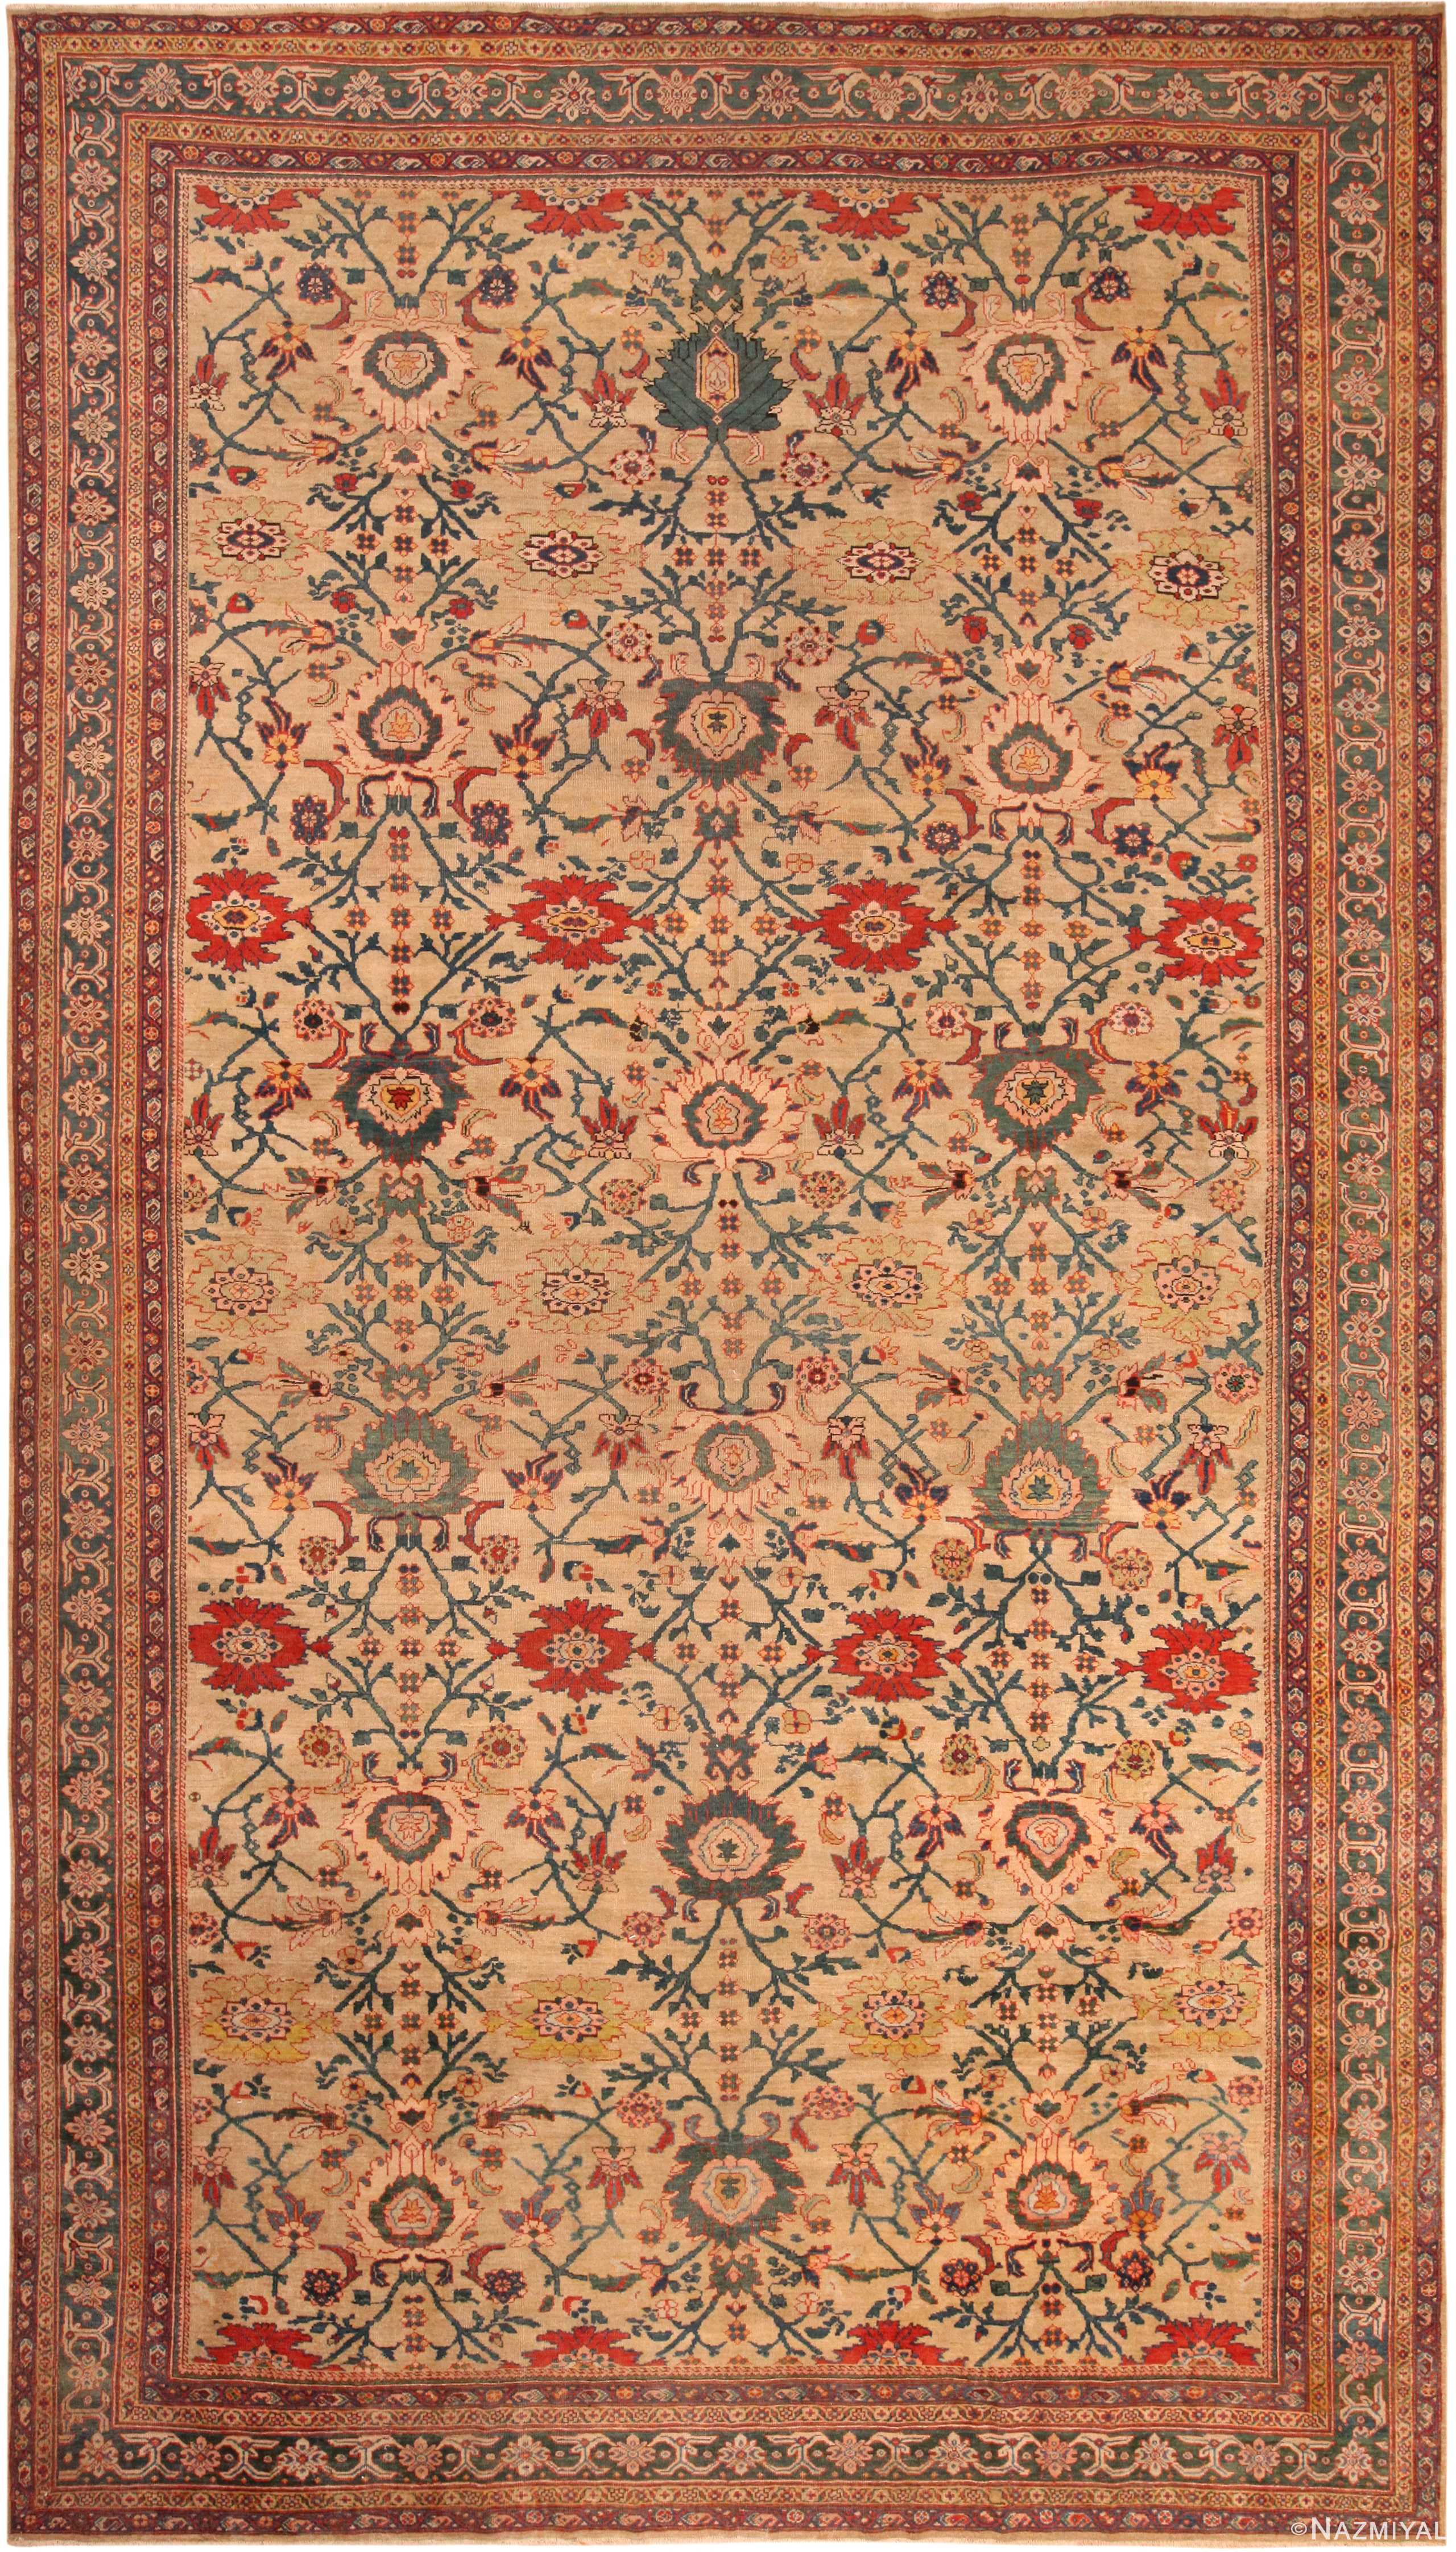 Large Antique Persian Sultanabad Rug 71756 by Nazmiyal Antique Rugs